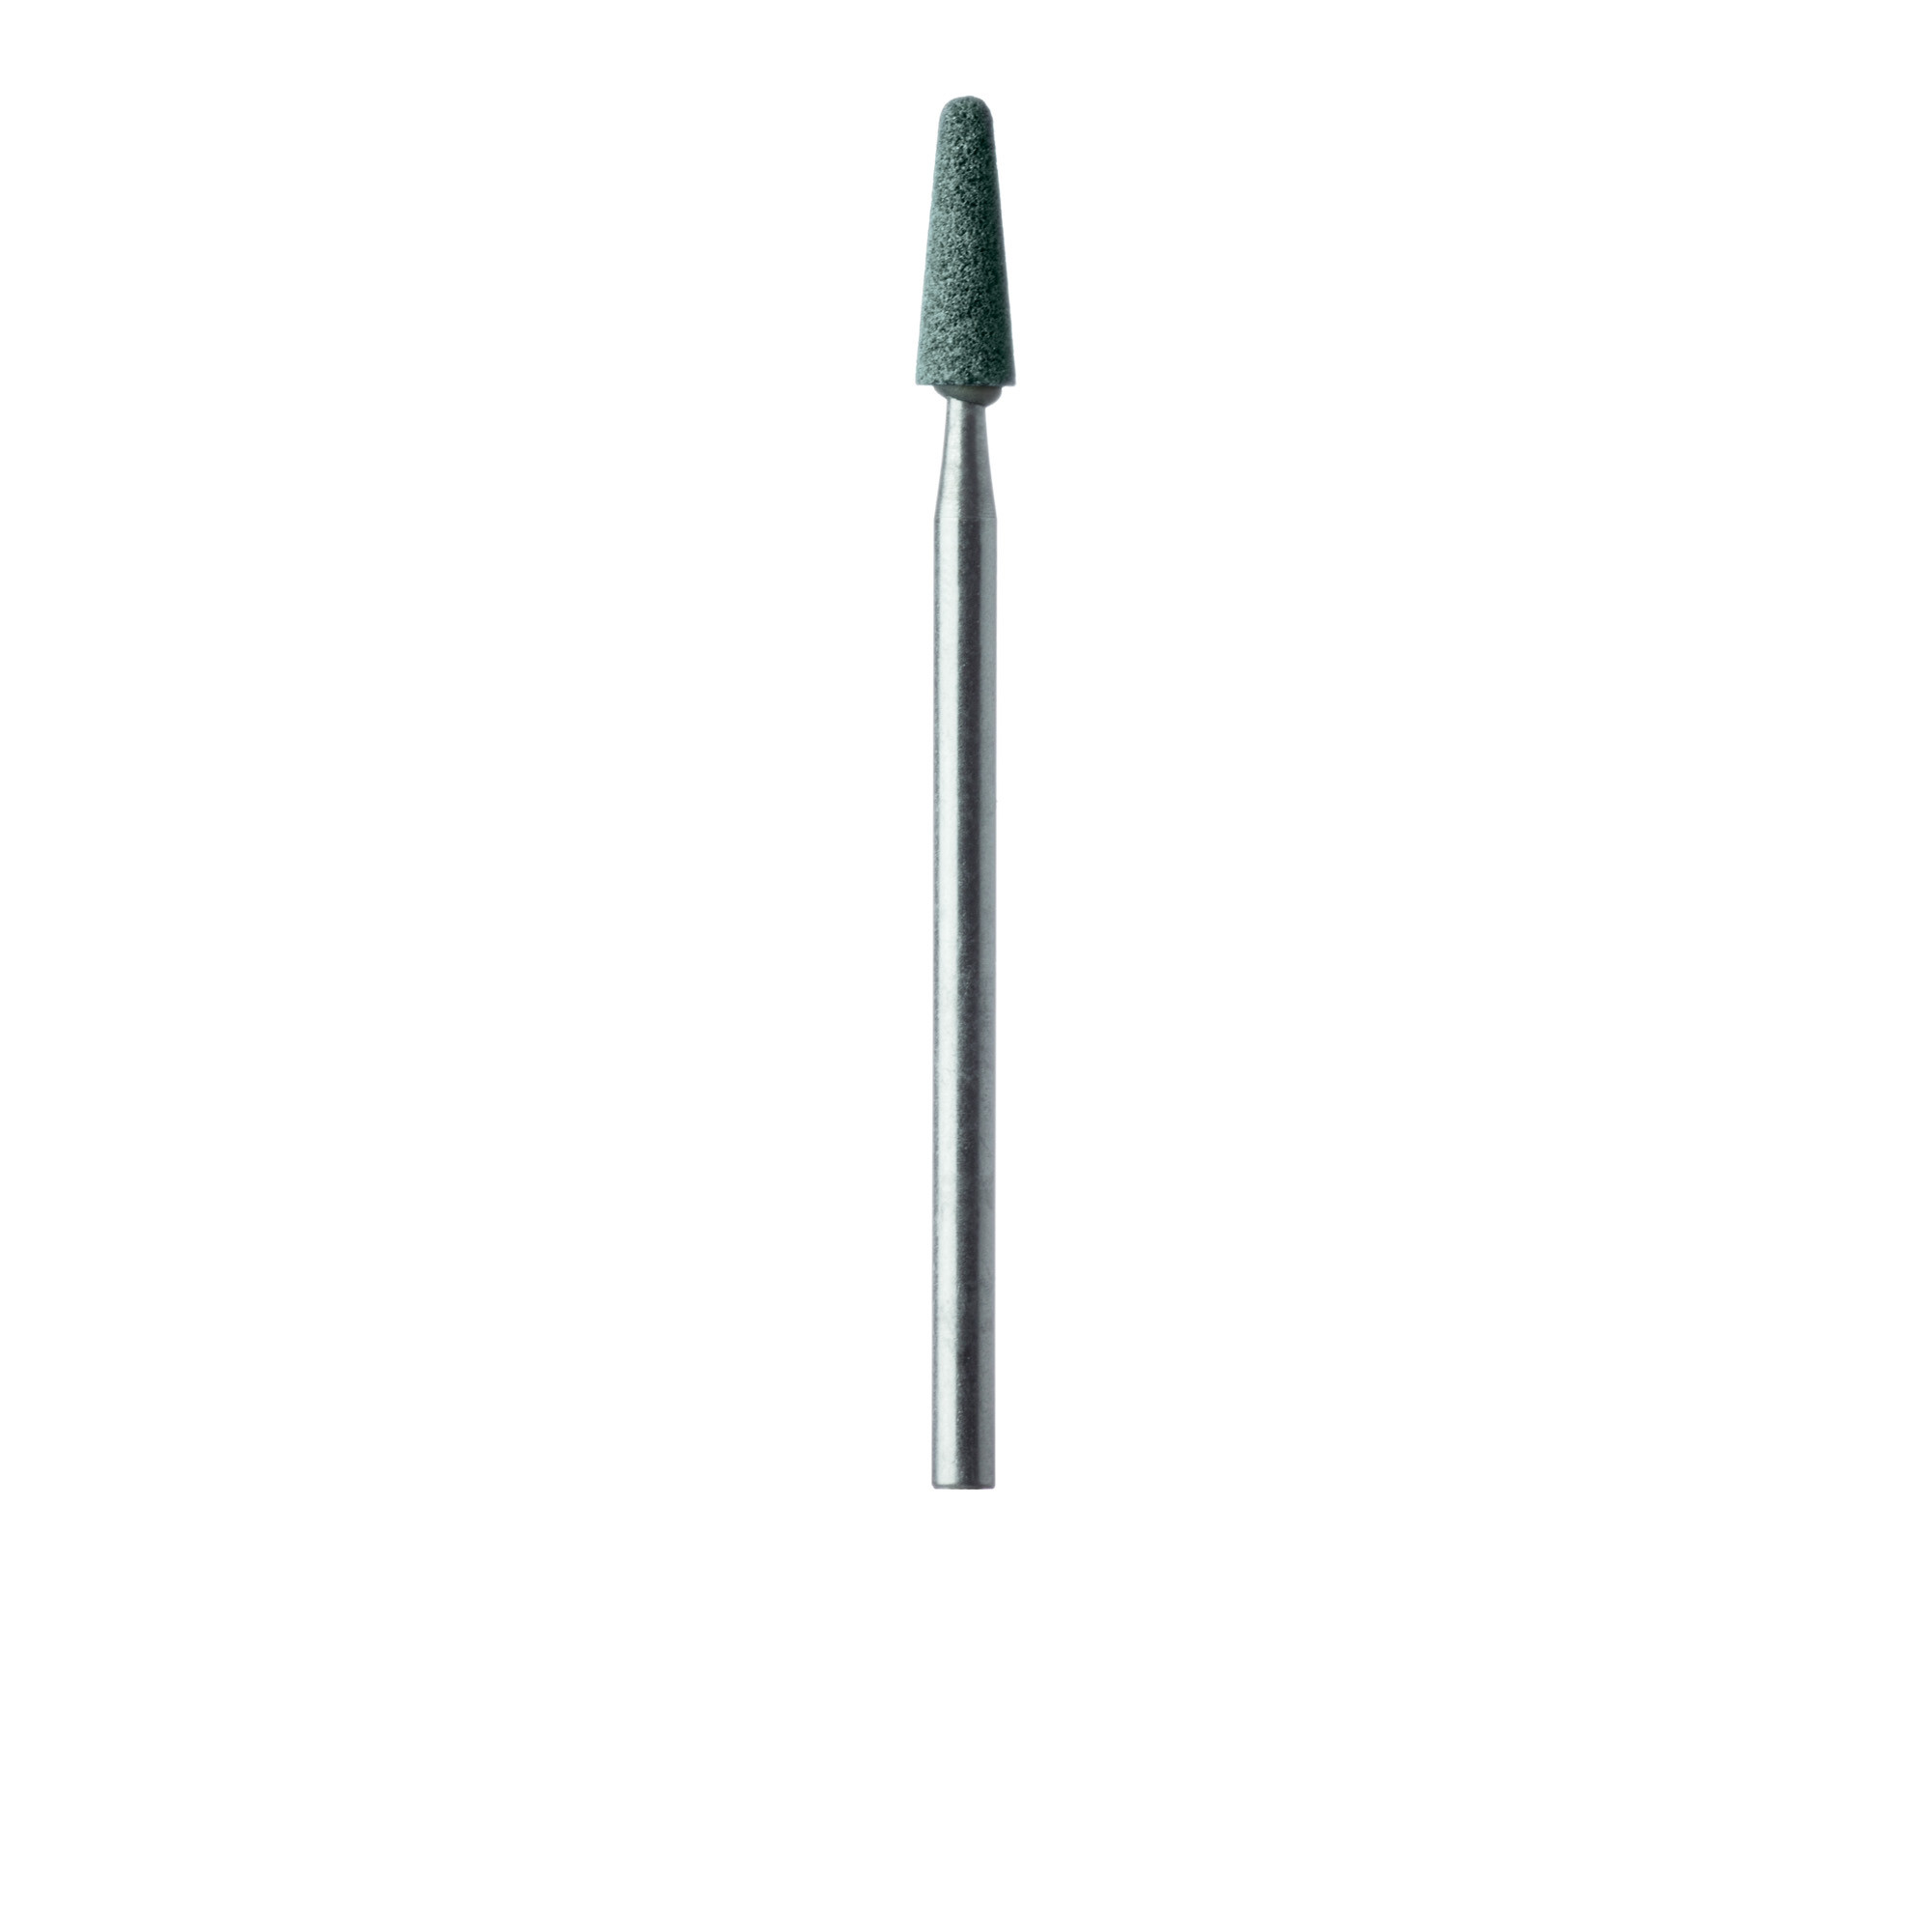 652R-035-HP-GRN Abrasive, Green Round End Taper, 3.5mm HP